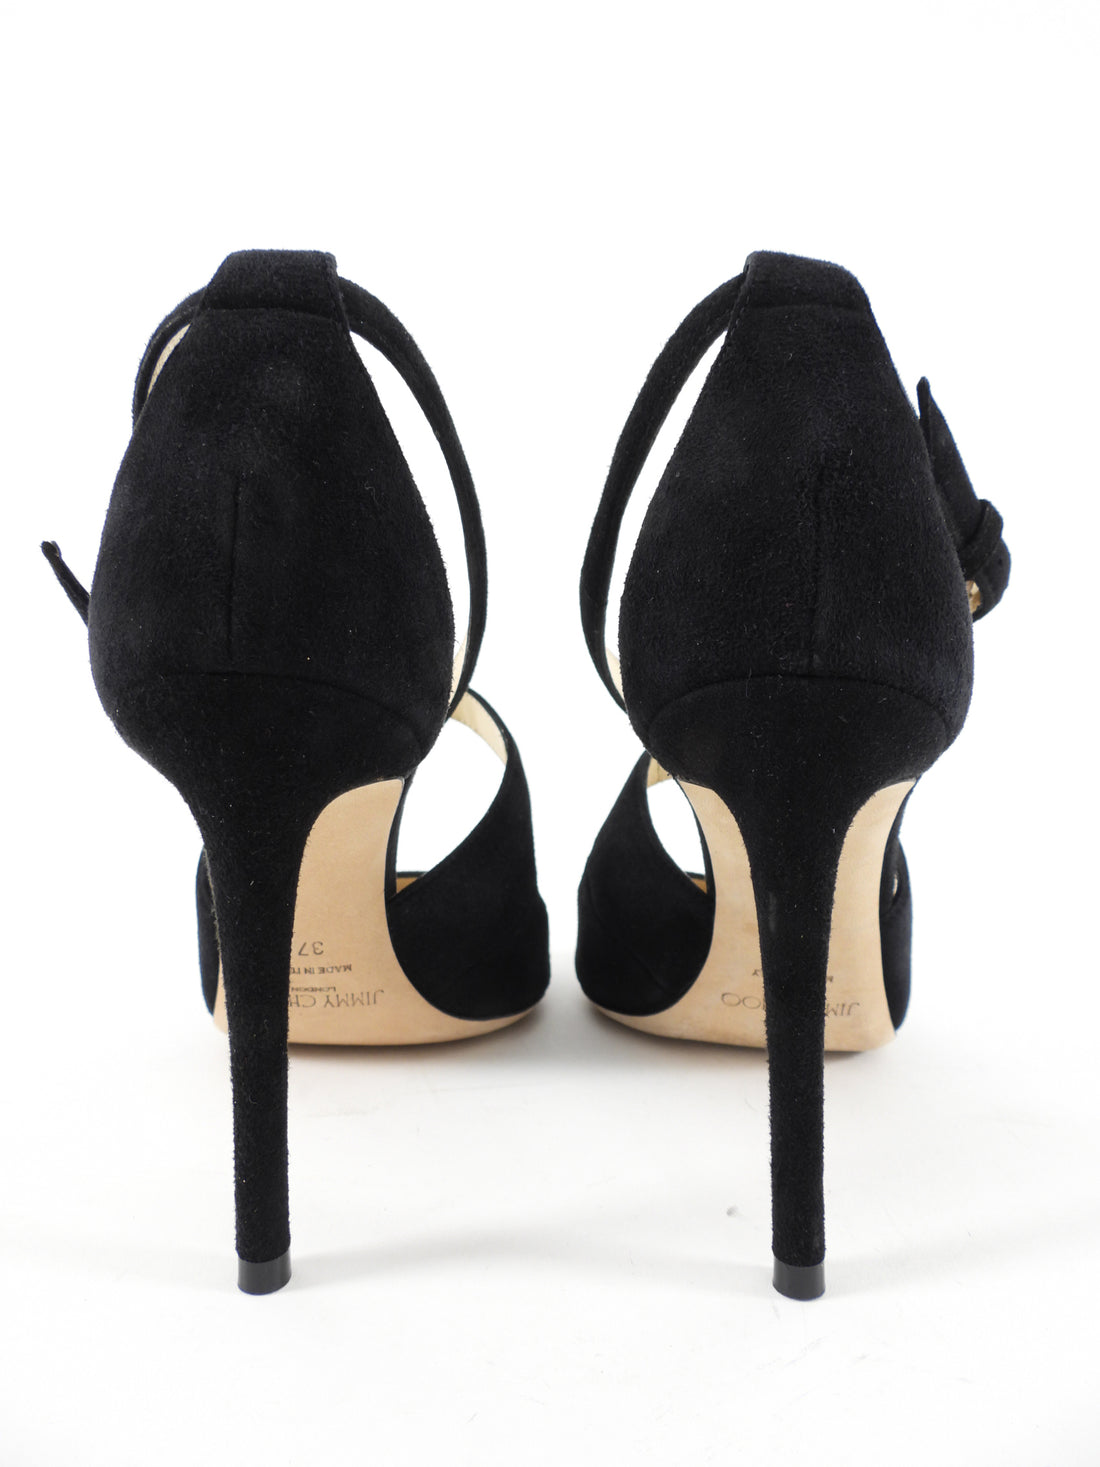 Jimmy Choo Emily Black Suede Strappy High Heel Sandals - 37